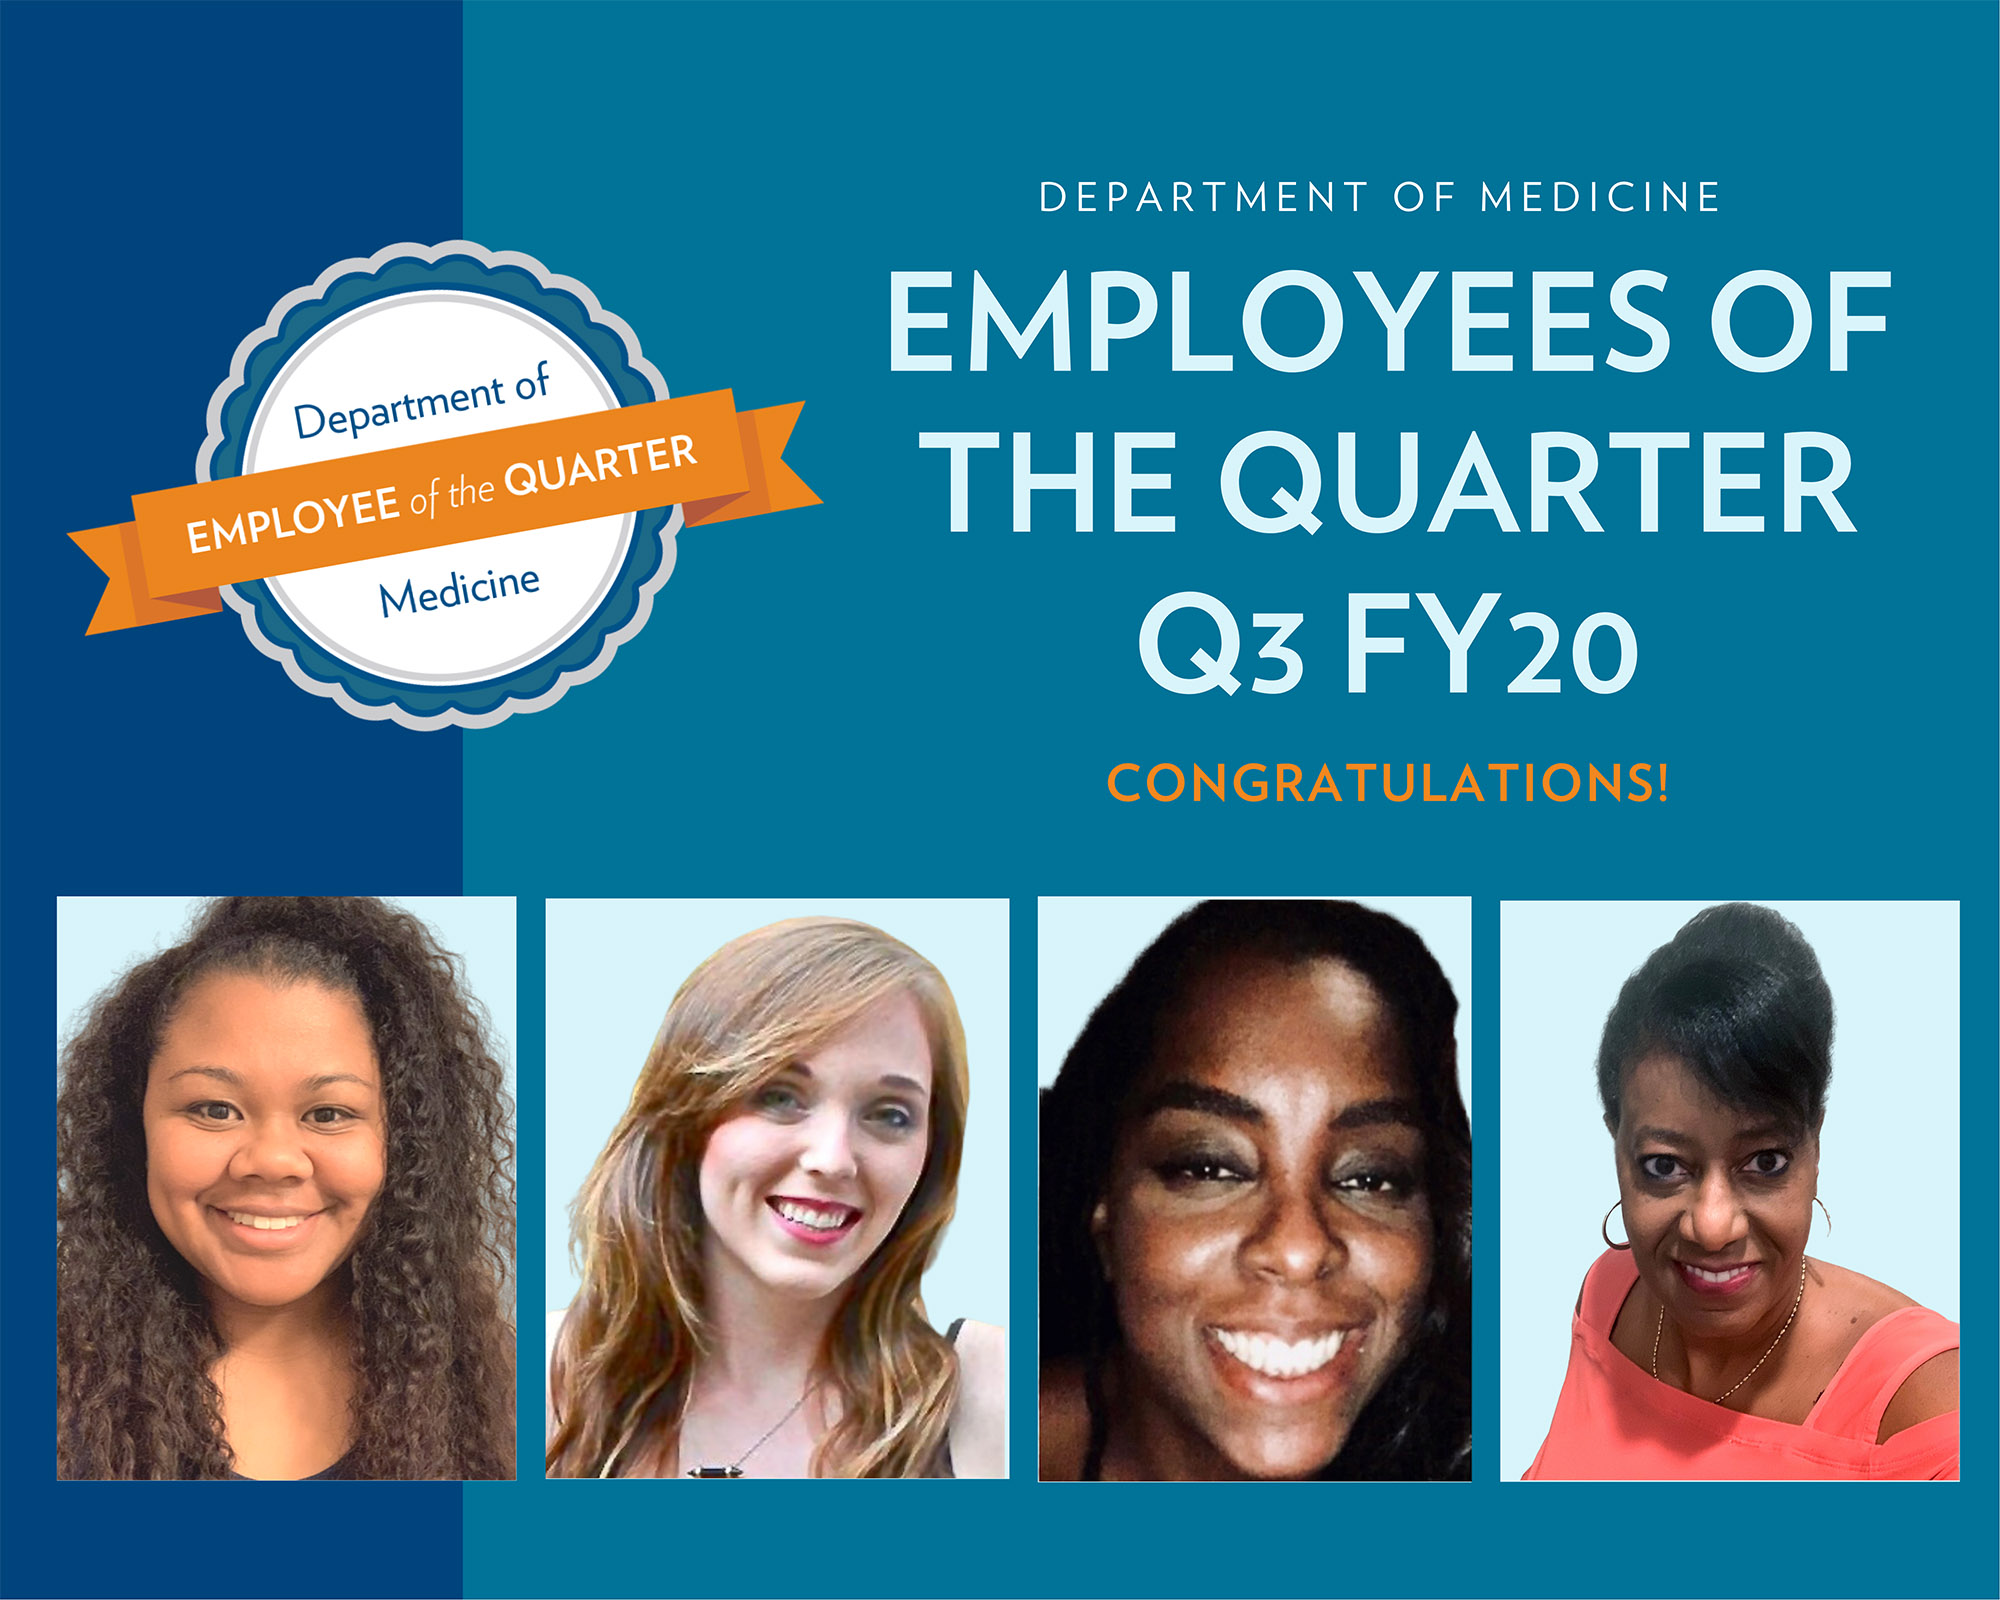 Employees of the Quarter Q3